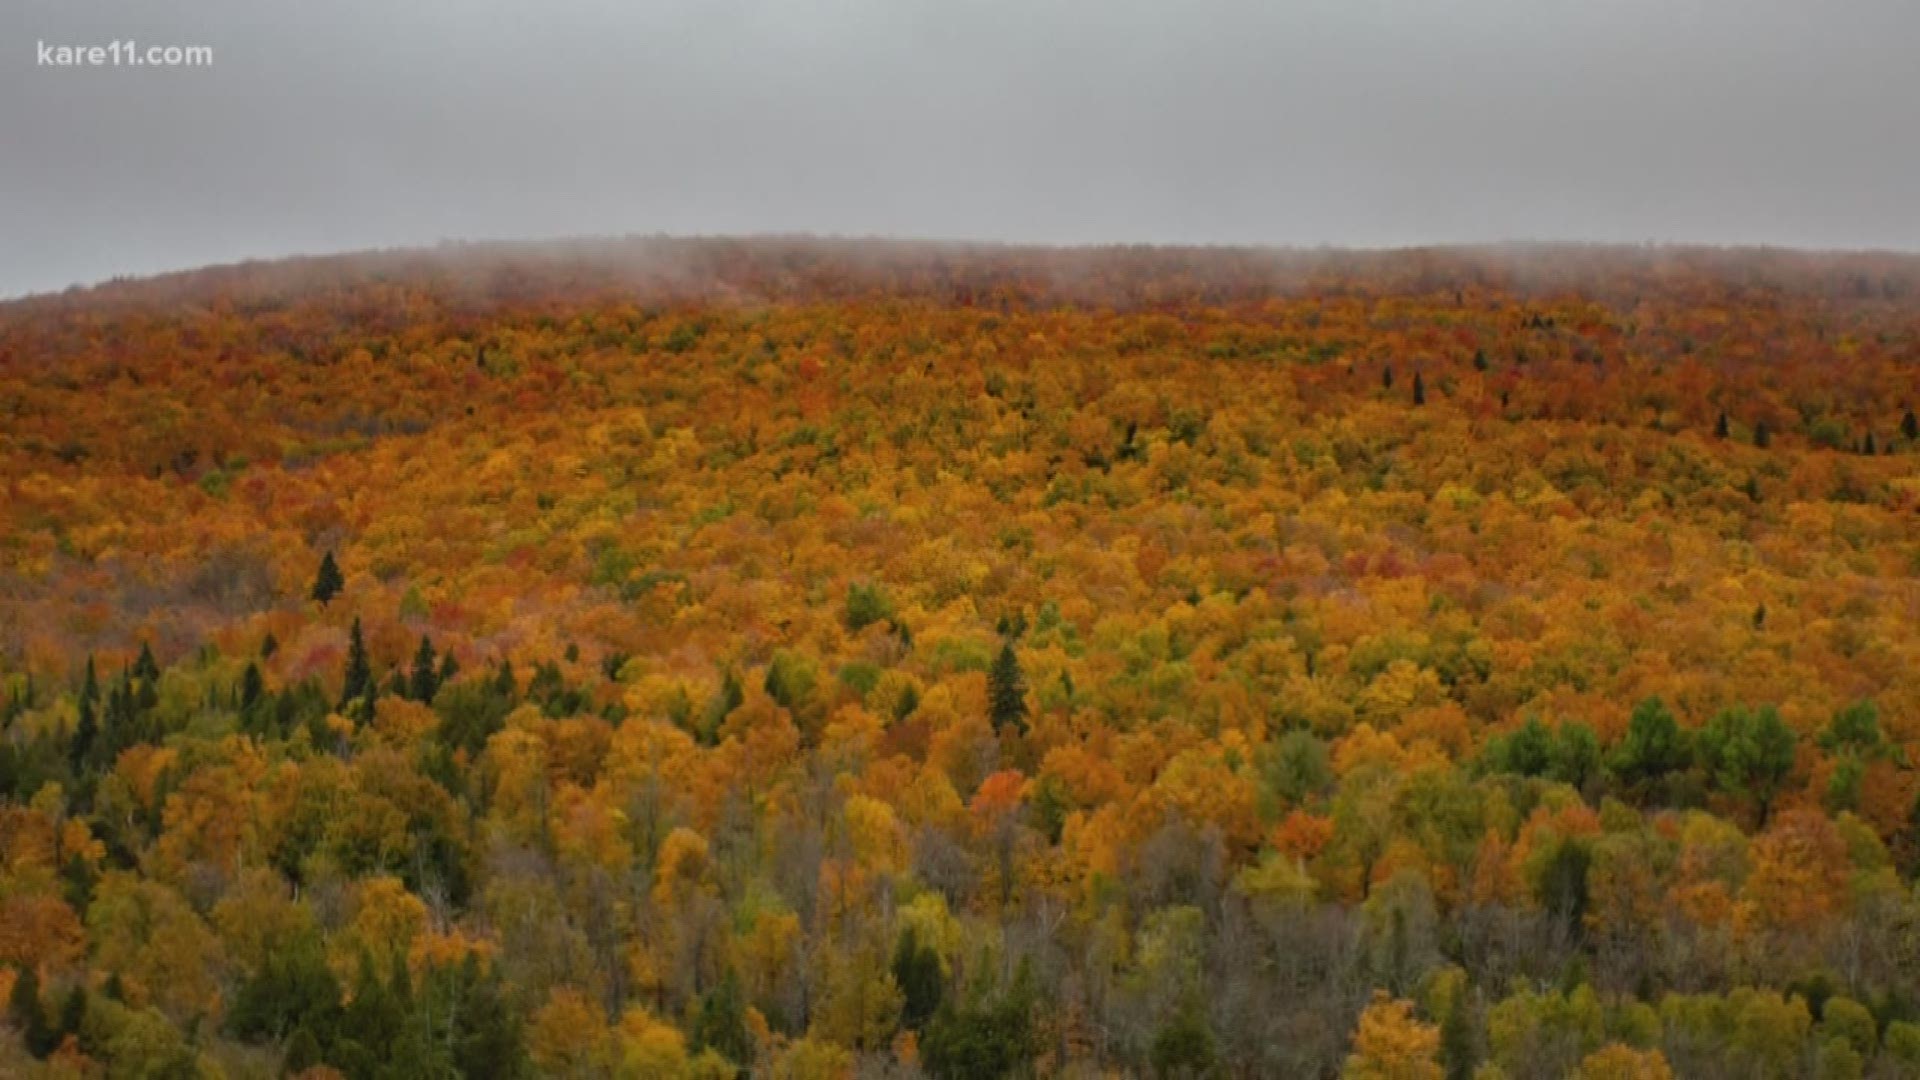 KARE 11's Ellery McCardle took a trip to the North Shore to check out the fall colors - and they did not disappoint!